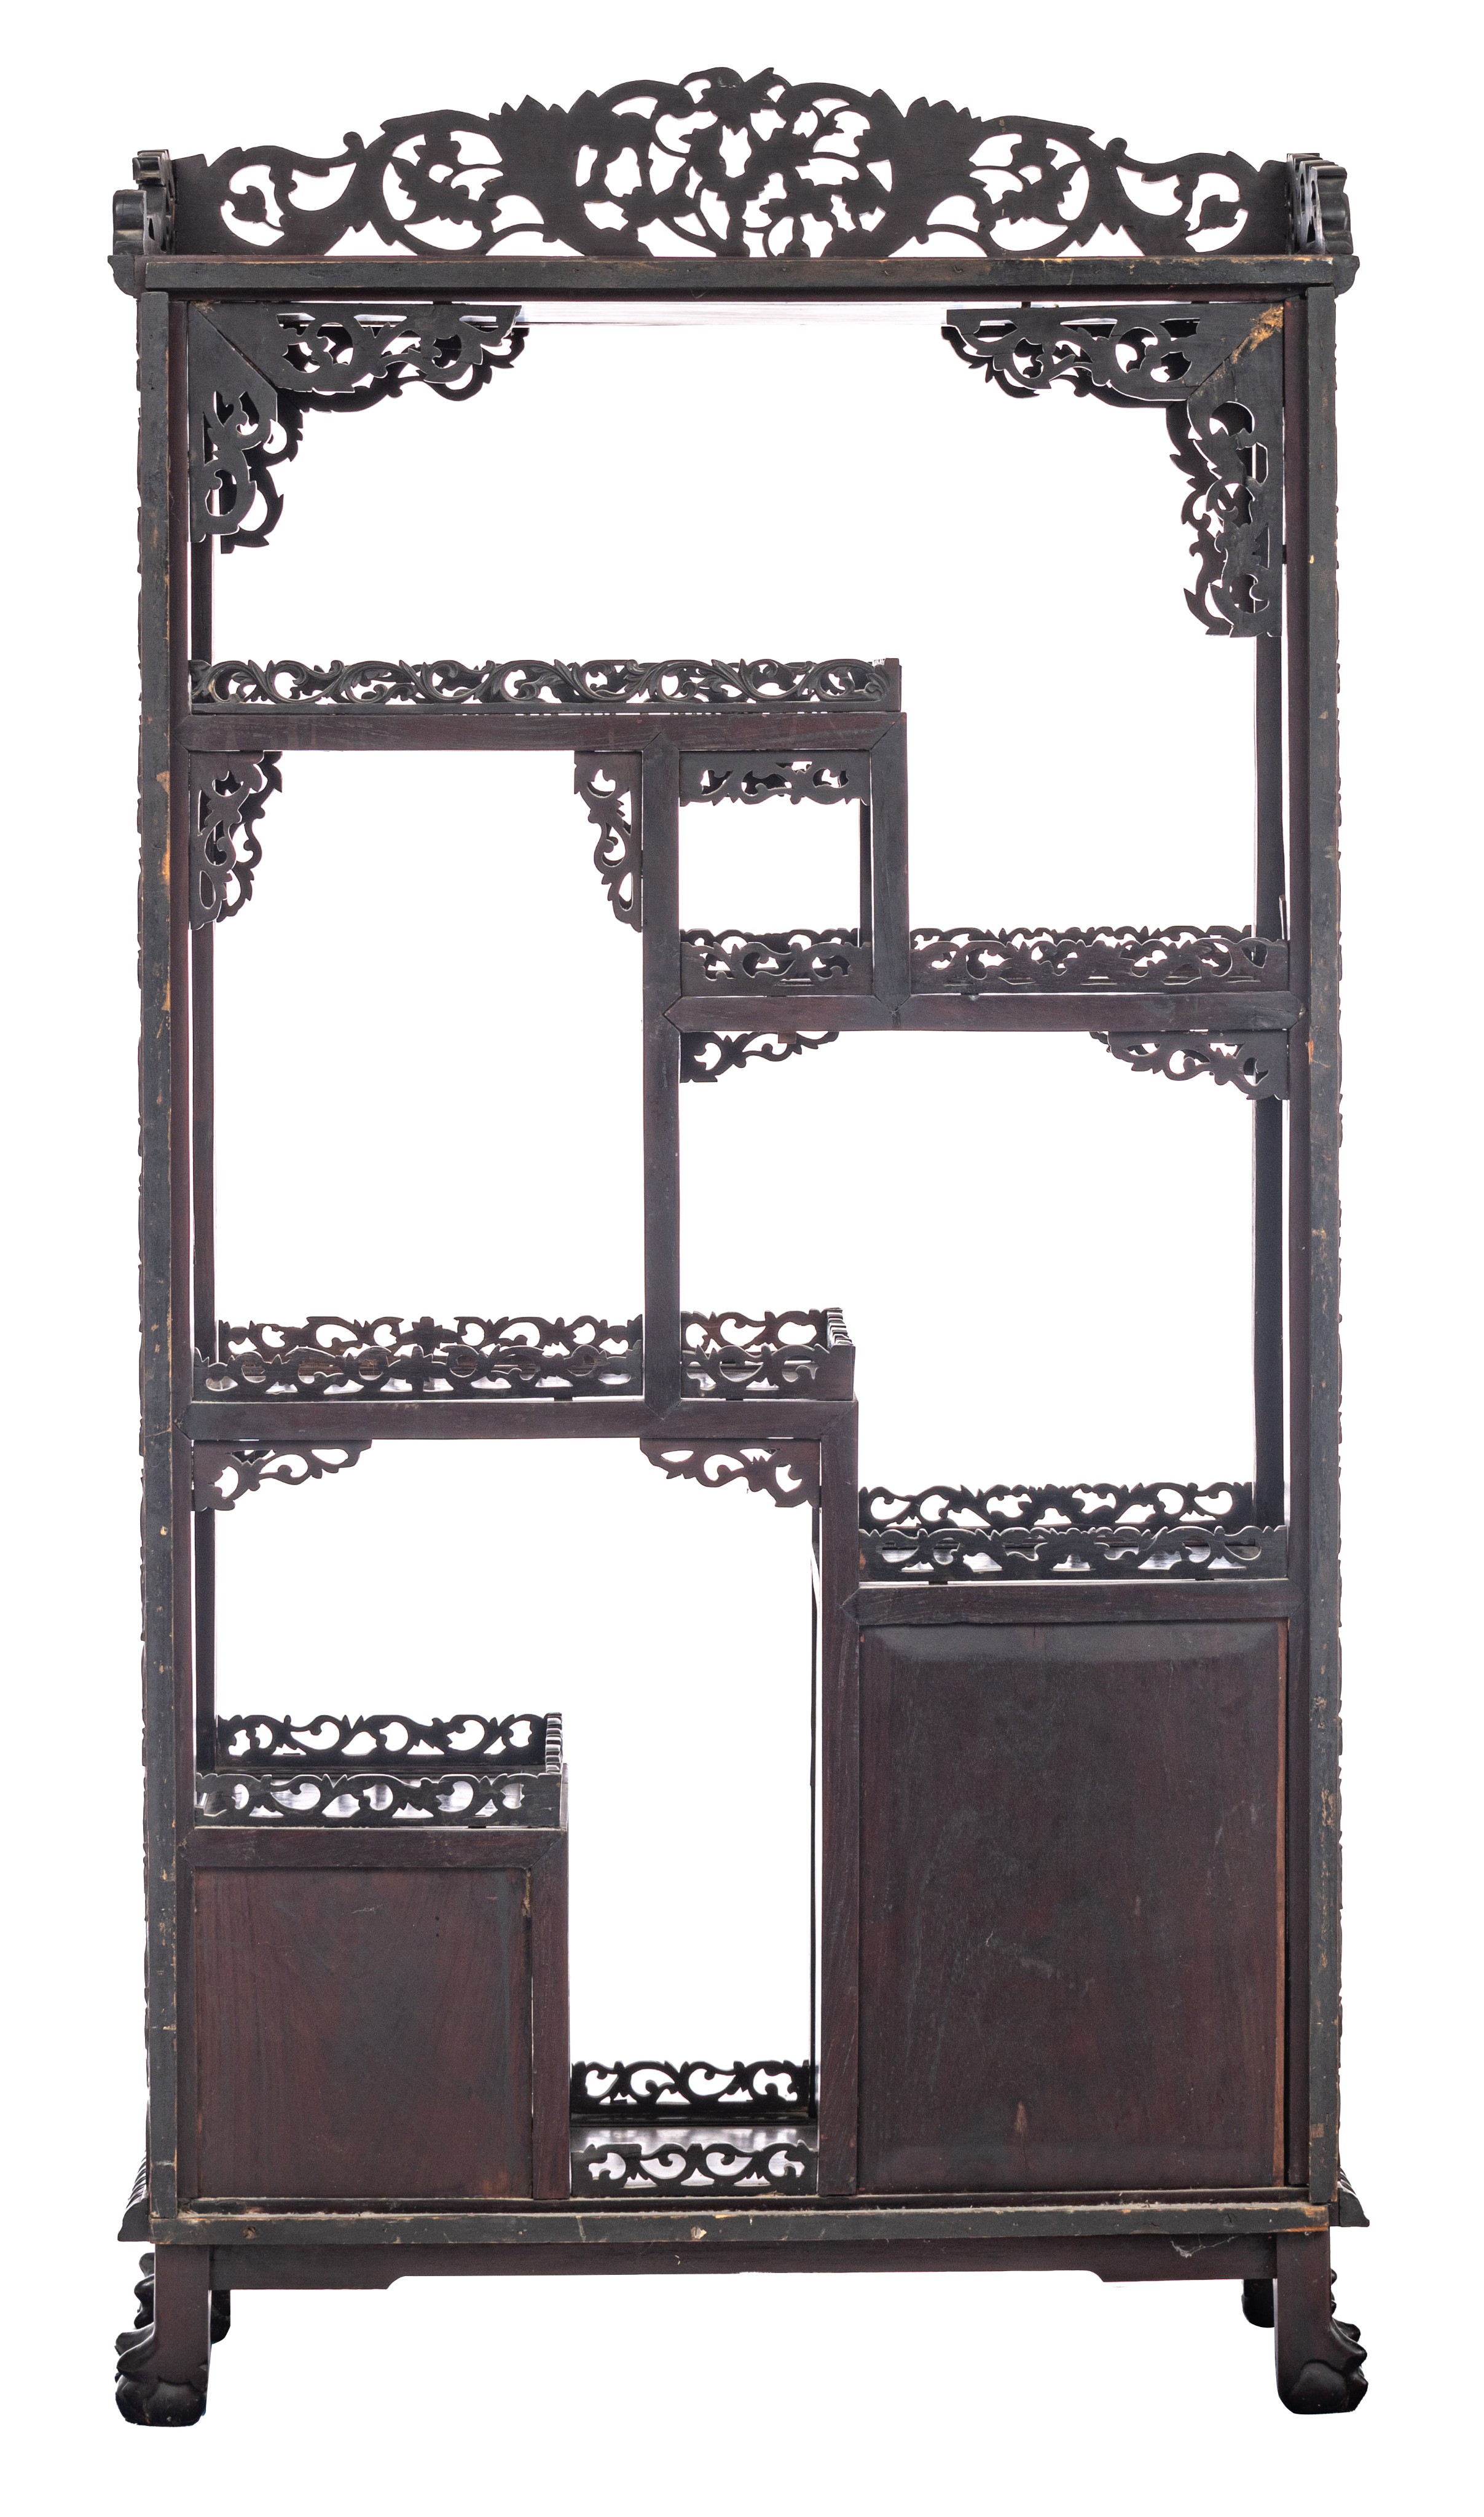 A Chinese carved hardwood cabinet, late Qing, H 177 - W 93 - D 38 cm - Image 4 of 8